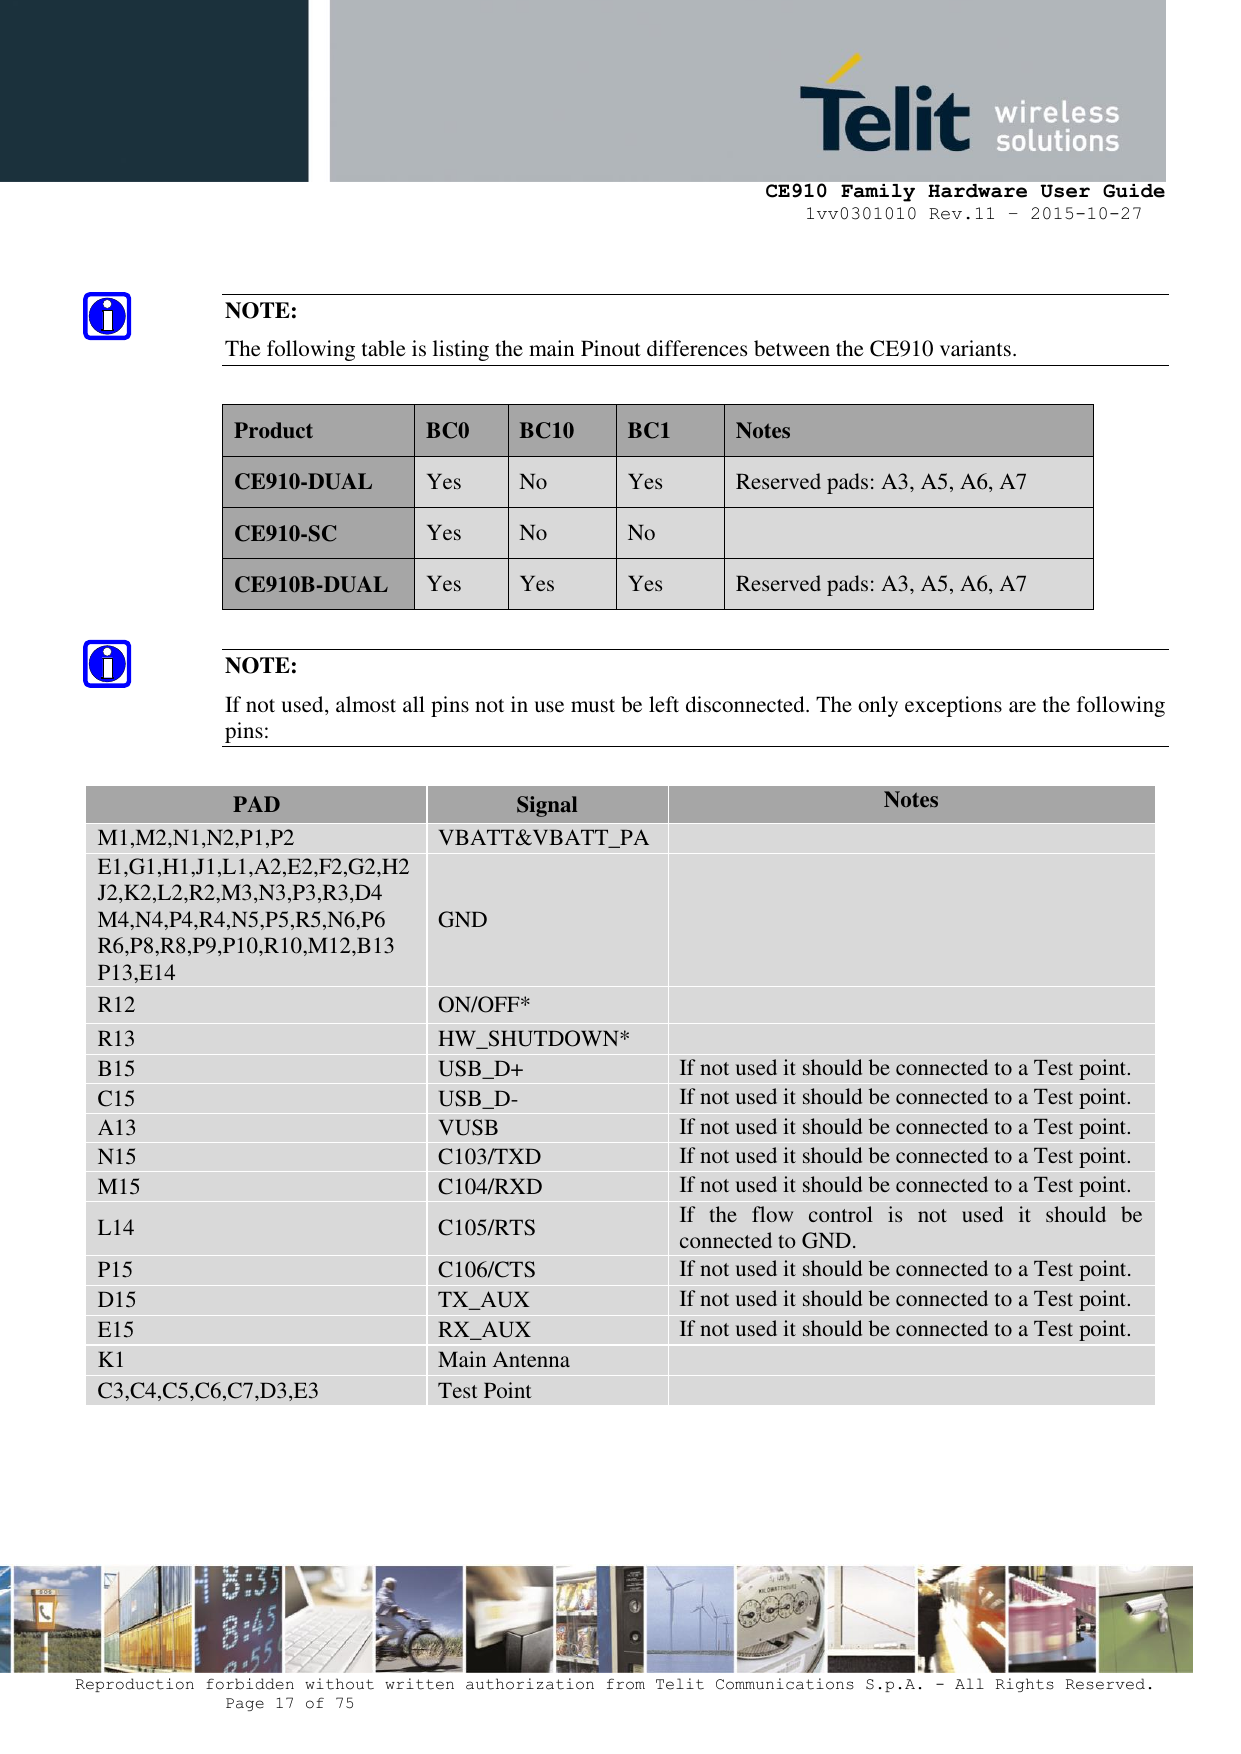     CE910 Family Hardware User Guide 1vv0301010 Rev.11 – 2015-10-27 Reproduction forbidden without written authorization from Telit Communications S.p.A. - All Rights Reserved.    Page 17 of 75                                                      NOTE: The following table is listing the main Pinout differences between the CE910 variants.  Product BC0 BC10 BC1 Notes CE910-DUAL  Yes No Yes Reserved pads: A3, A5, A6, A7 CE910-SC Yes No No  CE910B-DUAL Yes Yes Yes Reserved pads: A3, A5, A6, A7  NOTE: If not used, almost all pins not in use must be left disconnected. The only exceptions are the following pins:  PAD Signal Notes M1,M2,N1,N2,P1,P2 VBATT&amp;VBATT_PA  E1,G1,H1,J1,L1,A2,E2,F2,G2,H2J2,K2,L2,R2,M3,N3,P3,R3,D4 M4,N4,P4,R4,N5,P5,R5,N6,P6 R6,P8,R8,P9,P10,R10,M12,B13 P13,E14 GND  R12 ON/OFF*  R13 HW_SHUTDOWN*  B15 USB_D+ If not used it should be connected to a Test point. C15 USB_D- If not used it should be connected to a Test point. A13 VUSB If not used it should be connected to a Test point. N15 C103/TXD If not used it should be connected to a Test point. M15 C104/RXD If not used it should be connected to a Test point. L14 C105/RTS If  the  flow  control  is  not  used  it  should  be connected to GND. P15 C106/CTS If not used it should be connected to a Test point. D15 TX_AUX If not used it should be connected to a Test point. E15 RX_AUX If not used it should be connected to a Test point. K1 Main Antenna  C3,C4,C5,C6,C7,D3,E3 Test Point   